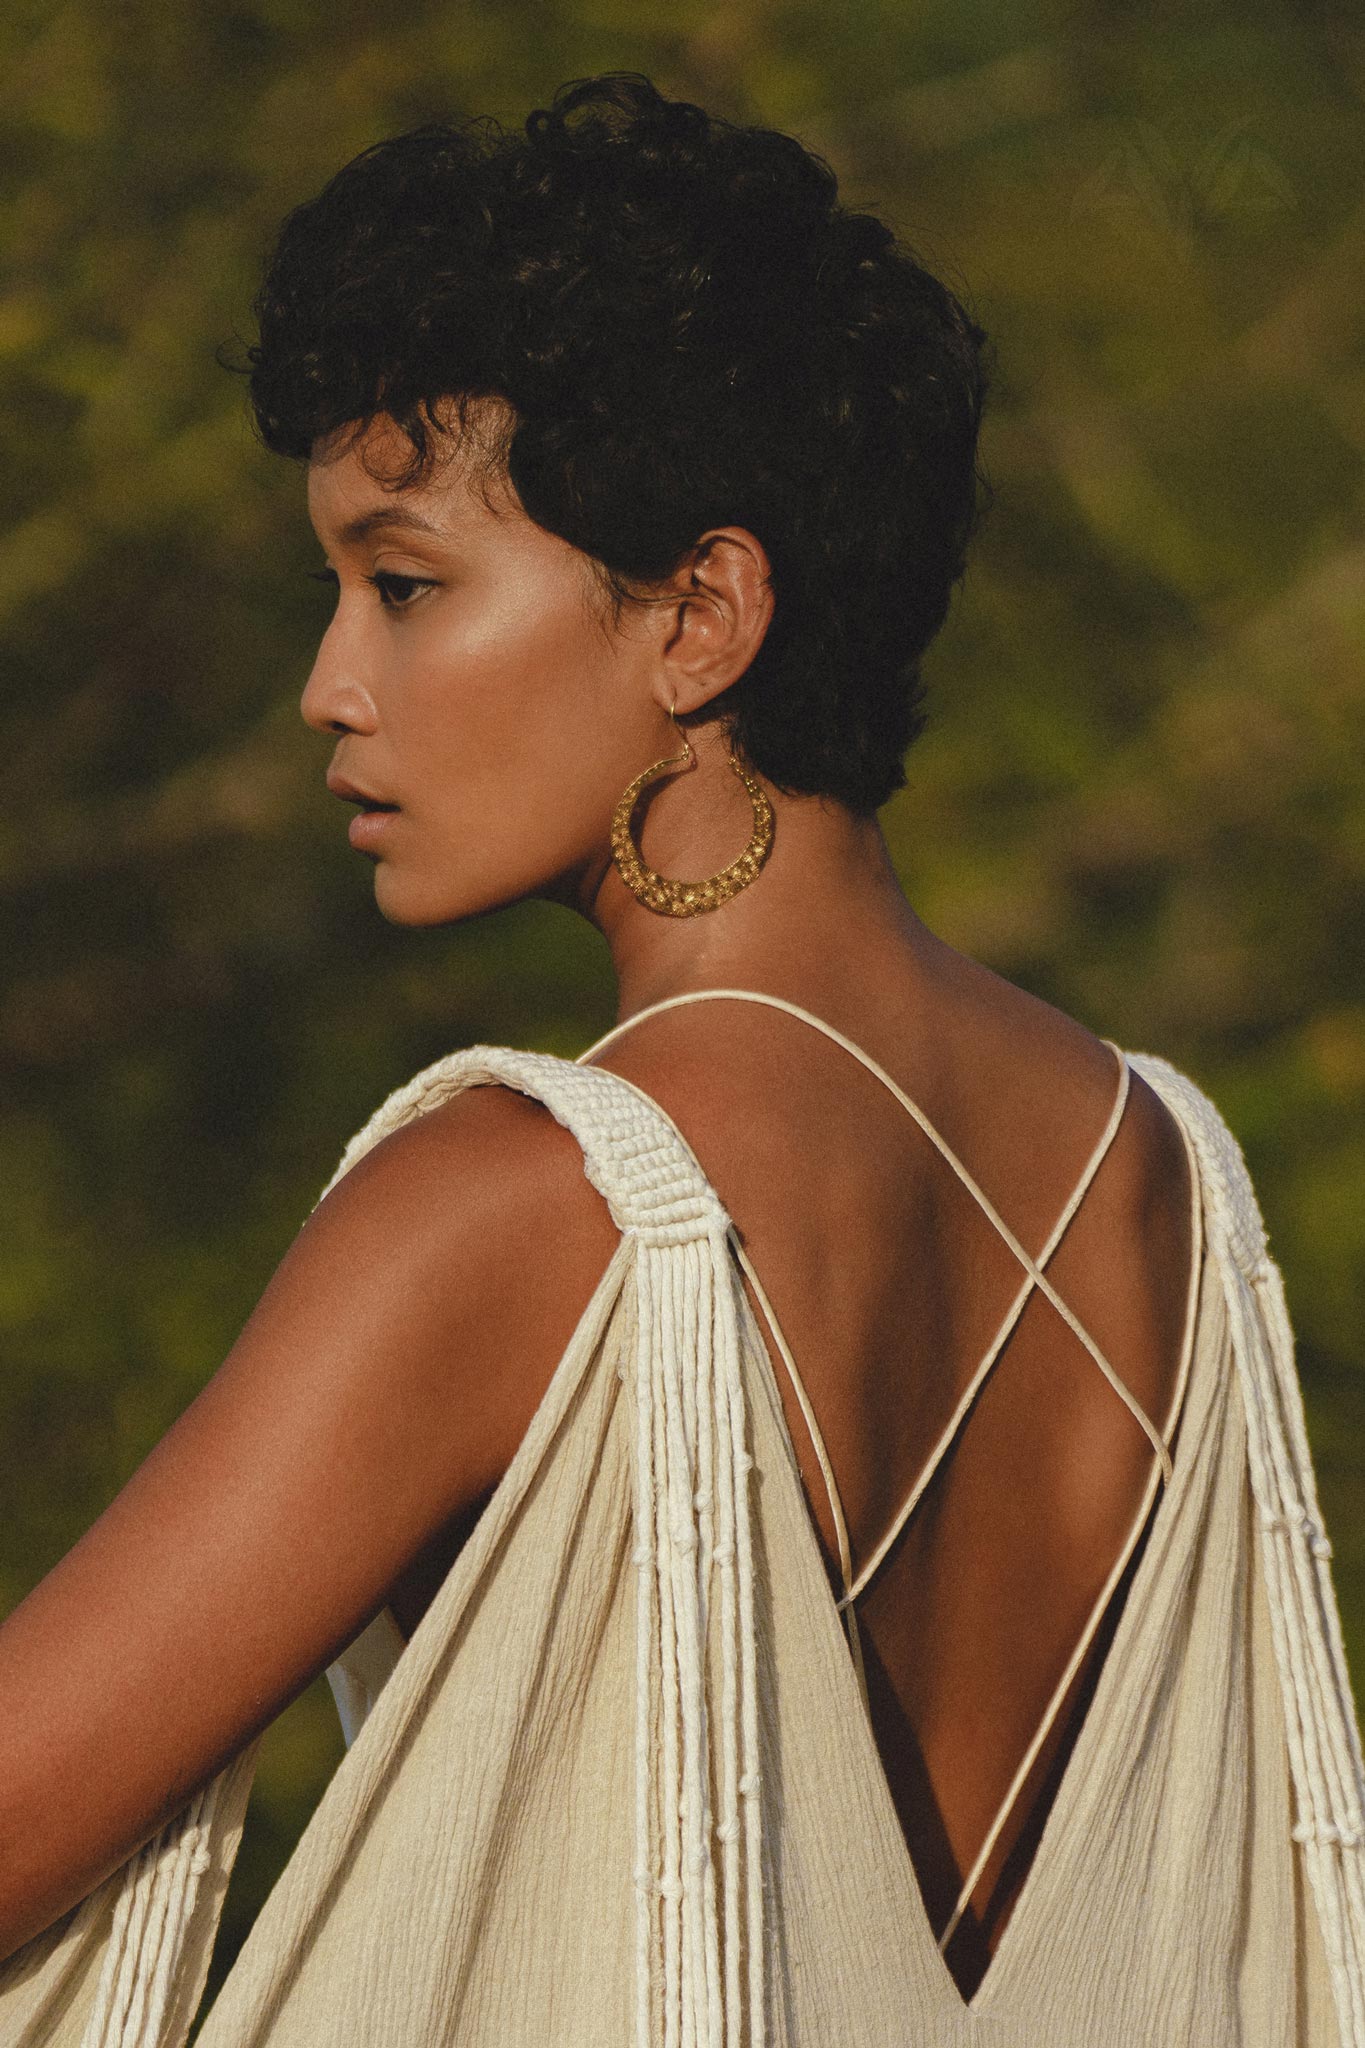 Make a statement with this stylish Sage Green Macrame Cape by Aya Sacred Wear.